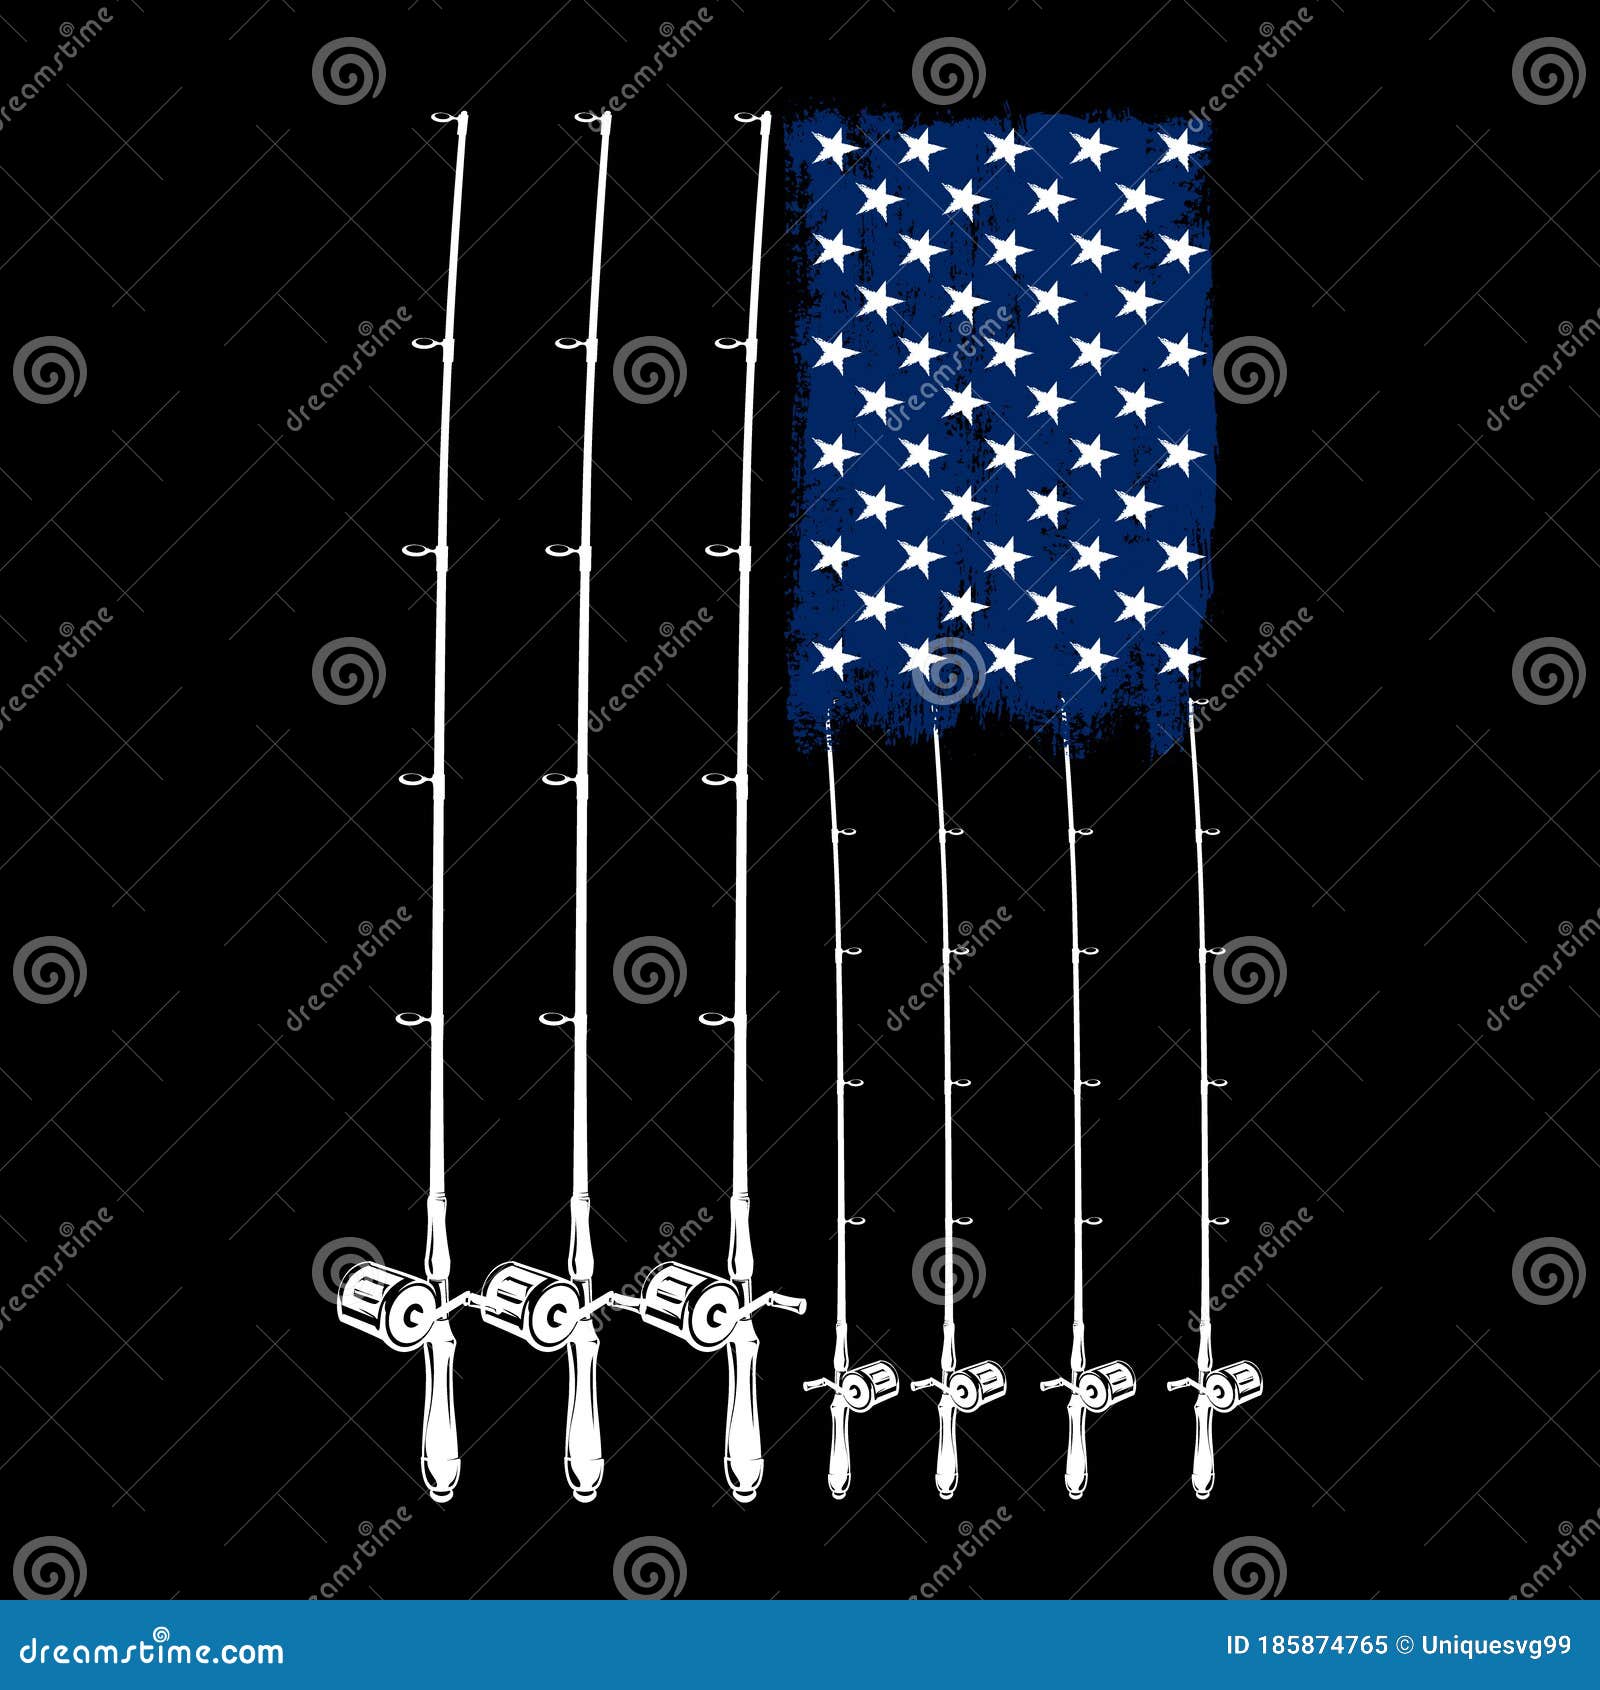 Download Fishing American Flag Vector- Design For T Shirt, Poster ...